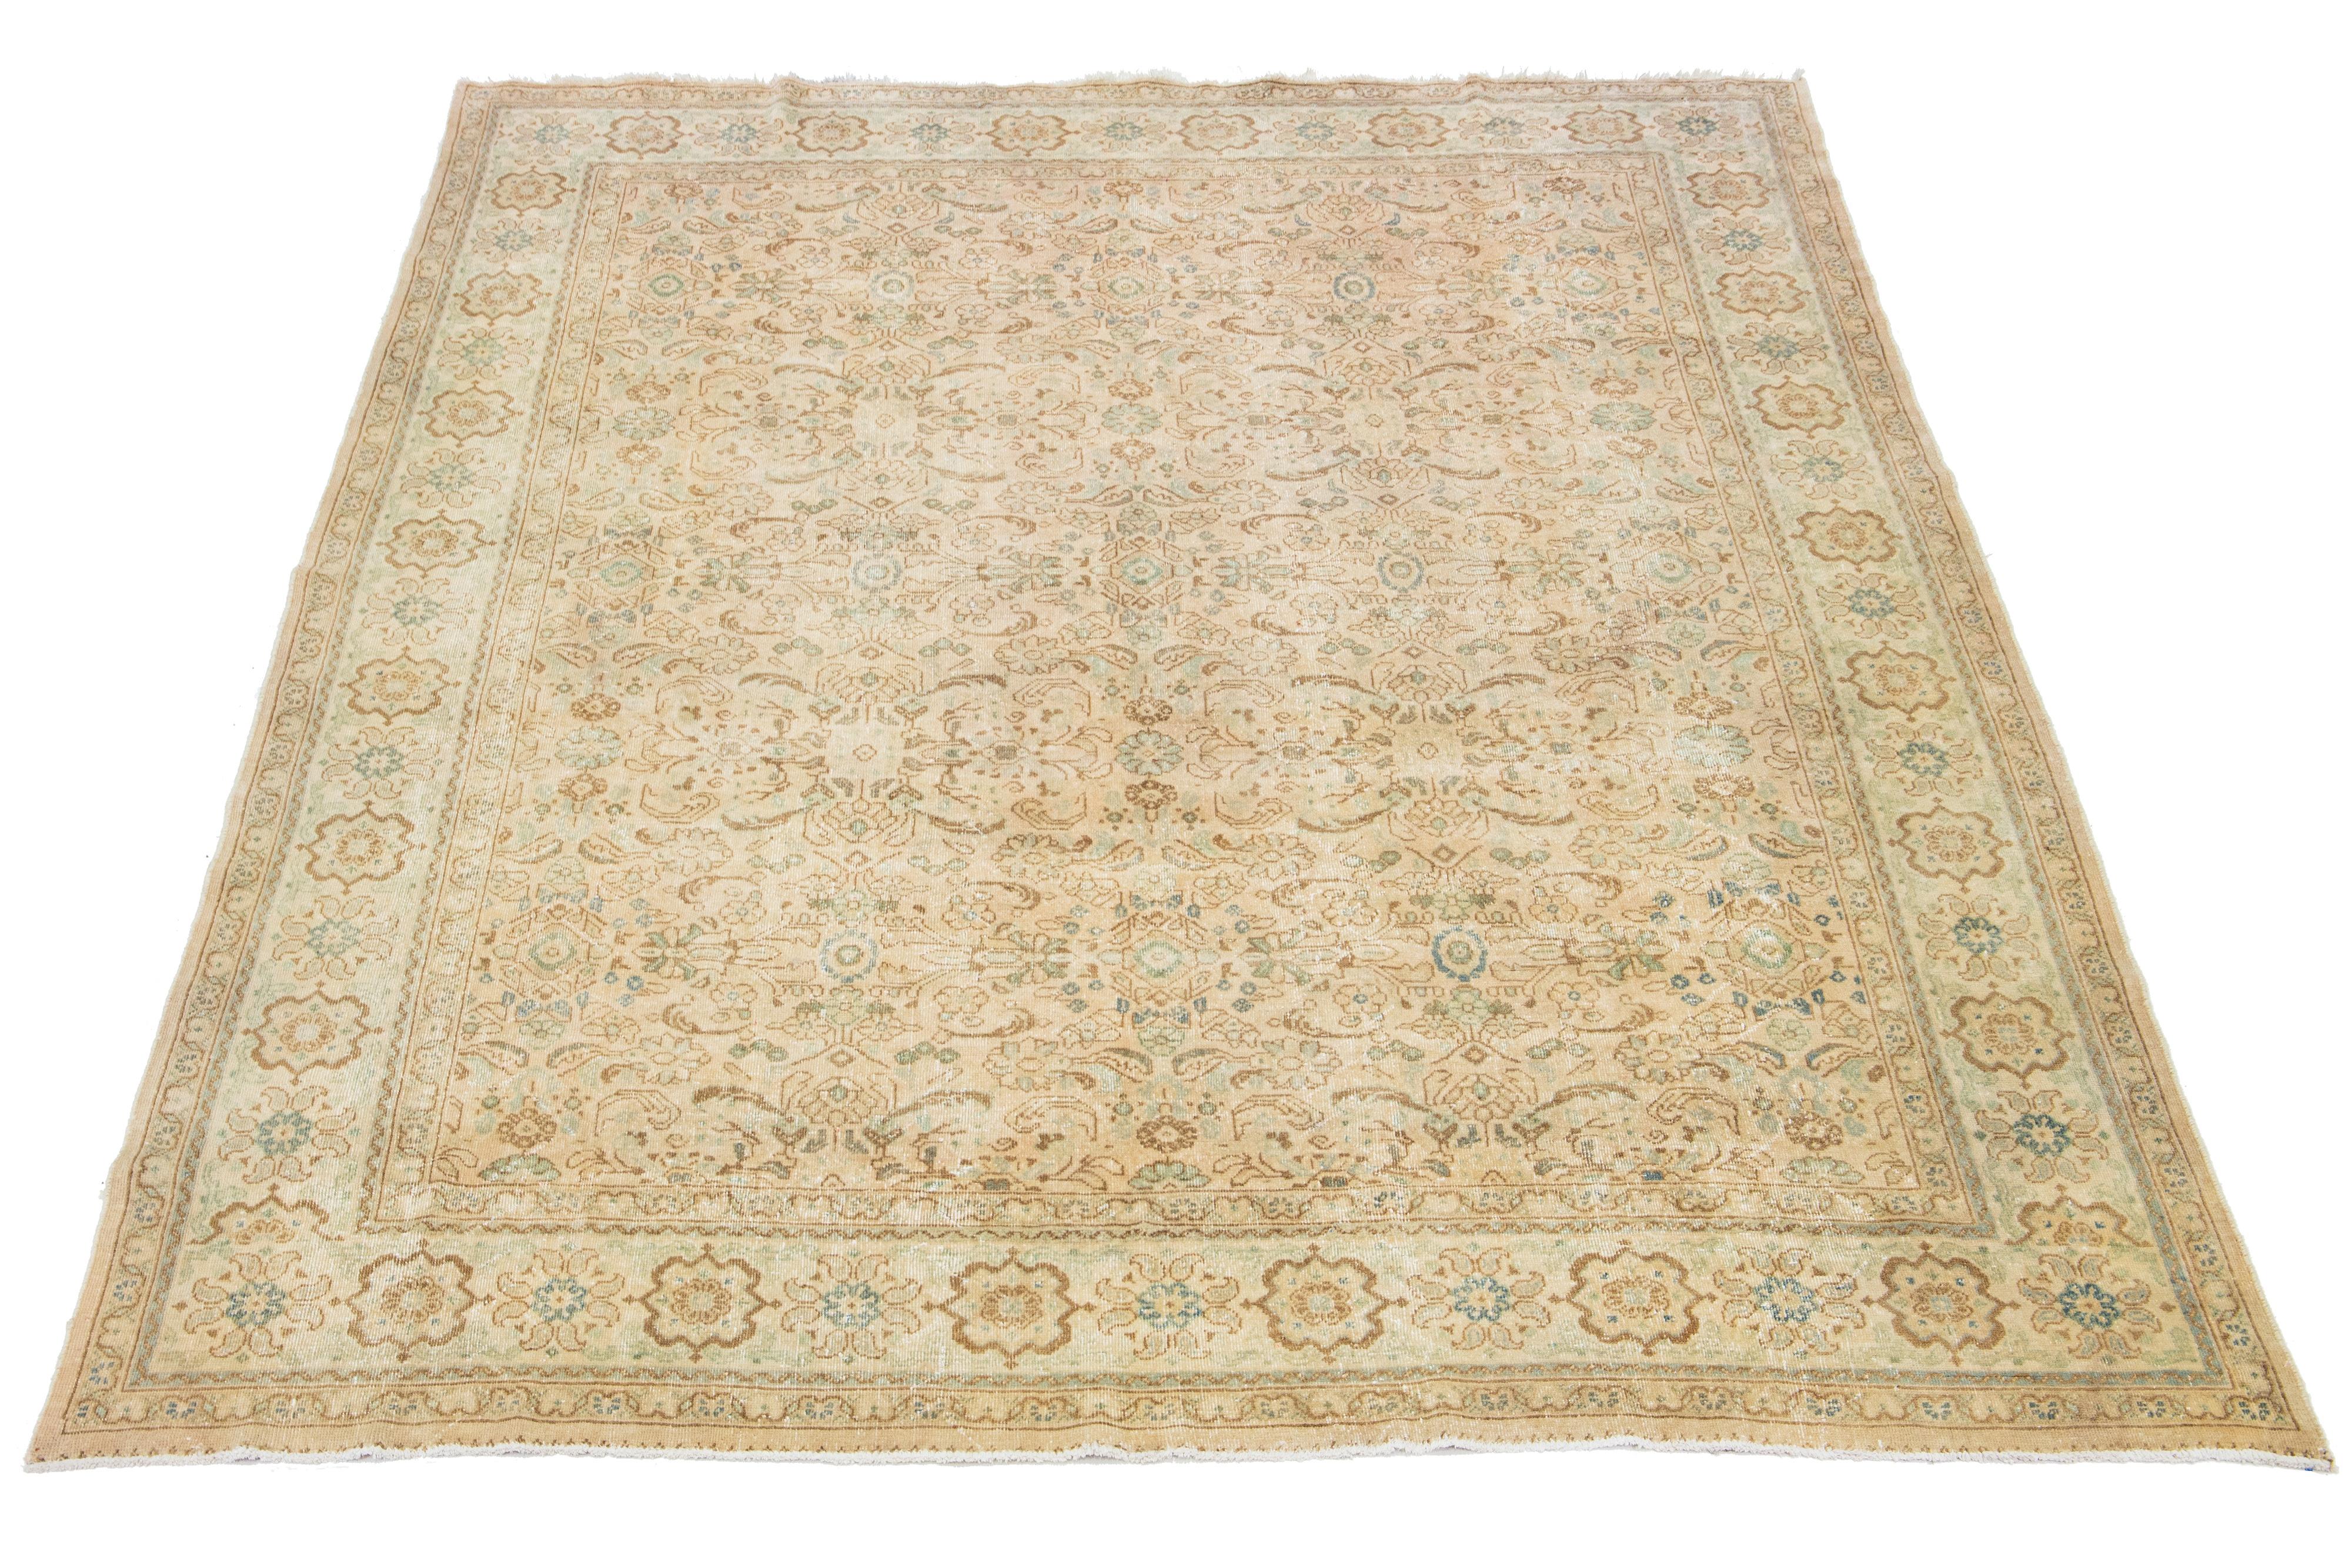 This handcrafted Persian Mahal wool rug showcases a traditional floral pattern. The contrast between the beige backdrop emphasizes the brown and blue floral design.

This rug measures 10'2